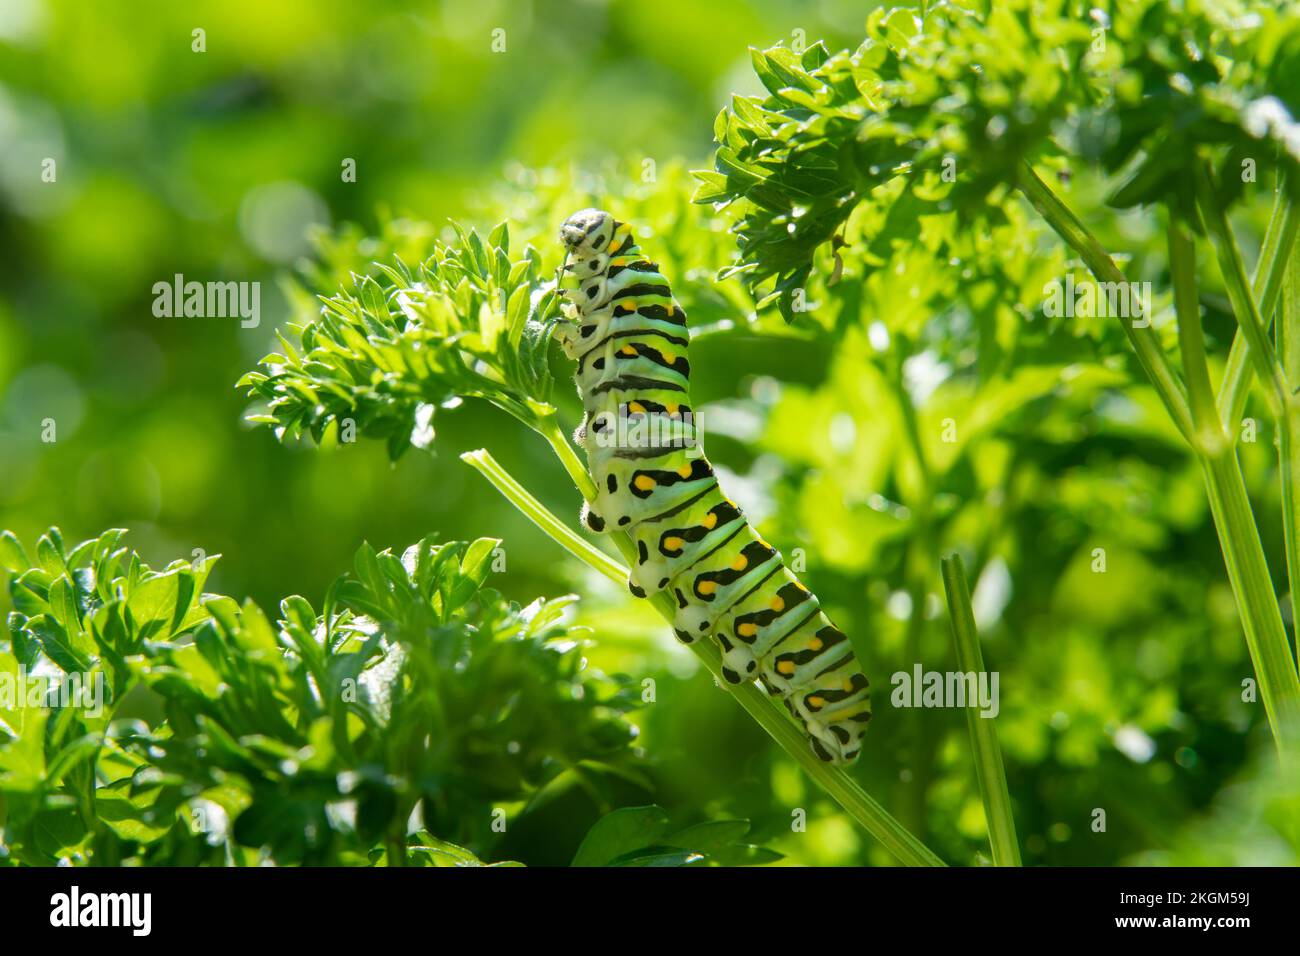 A caterpillar eats the leaves of a garden plant Stock Photo